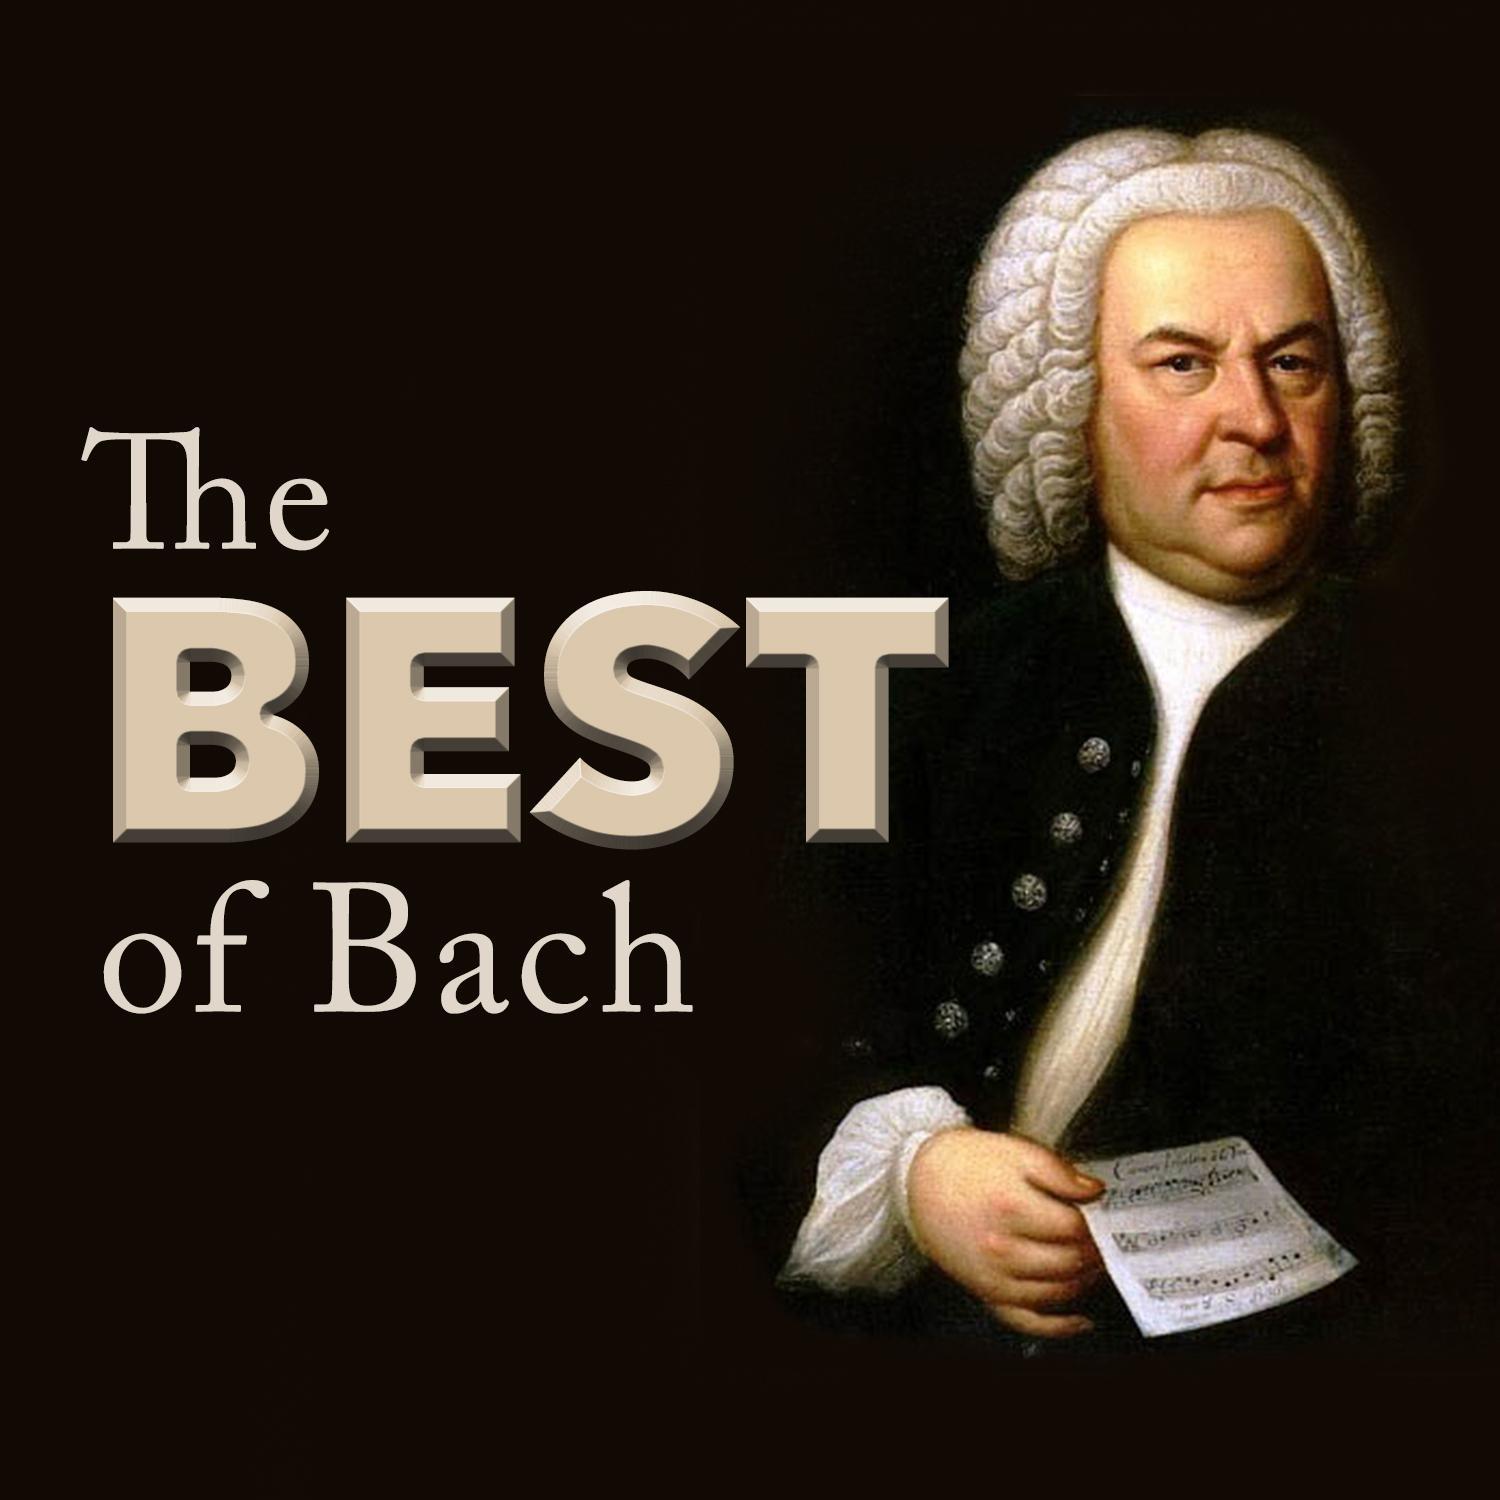 Orchestral Suite No. 1 in C Major, BWV 1066: IV. Forlana